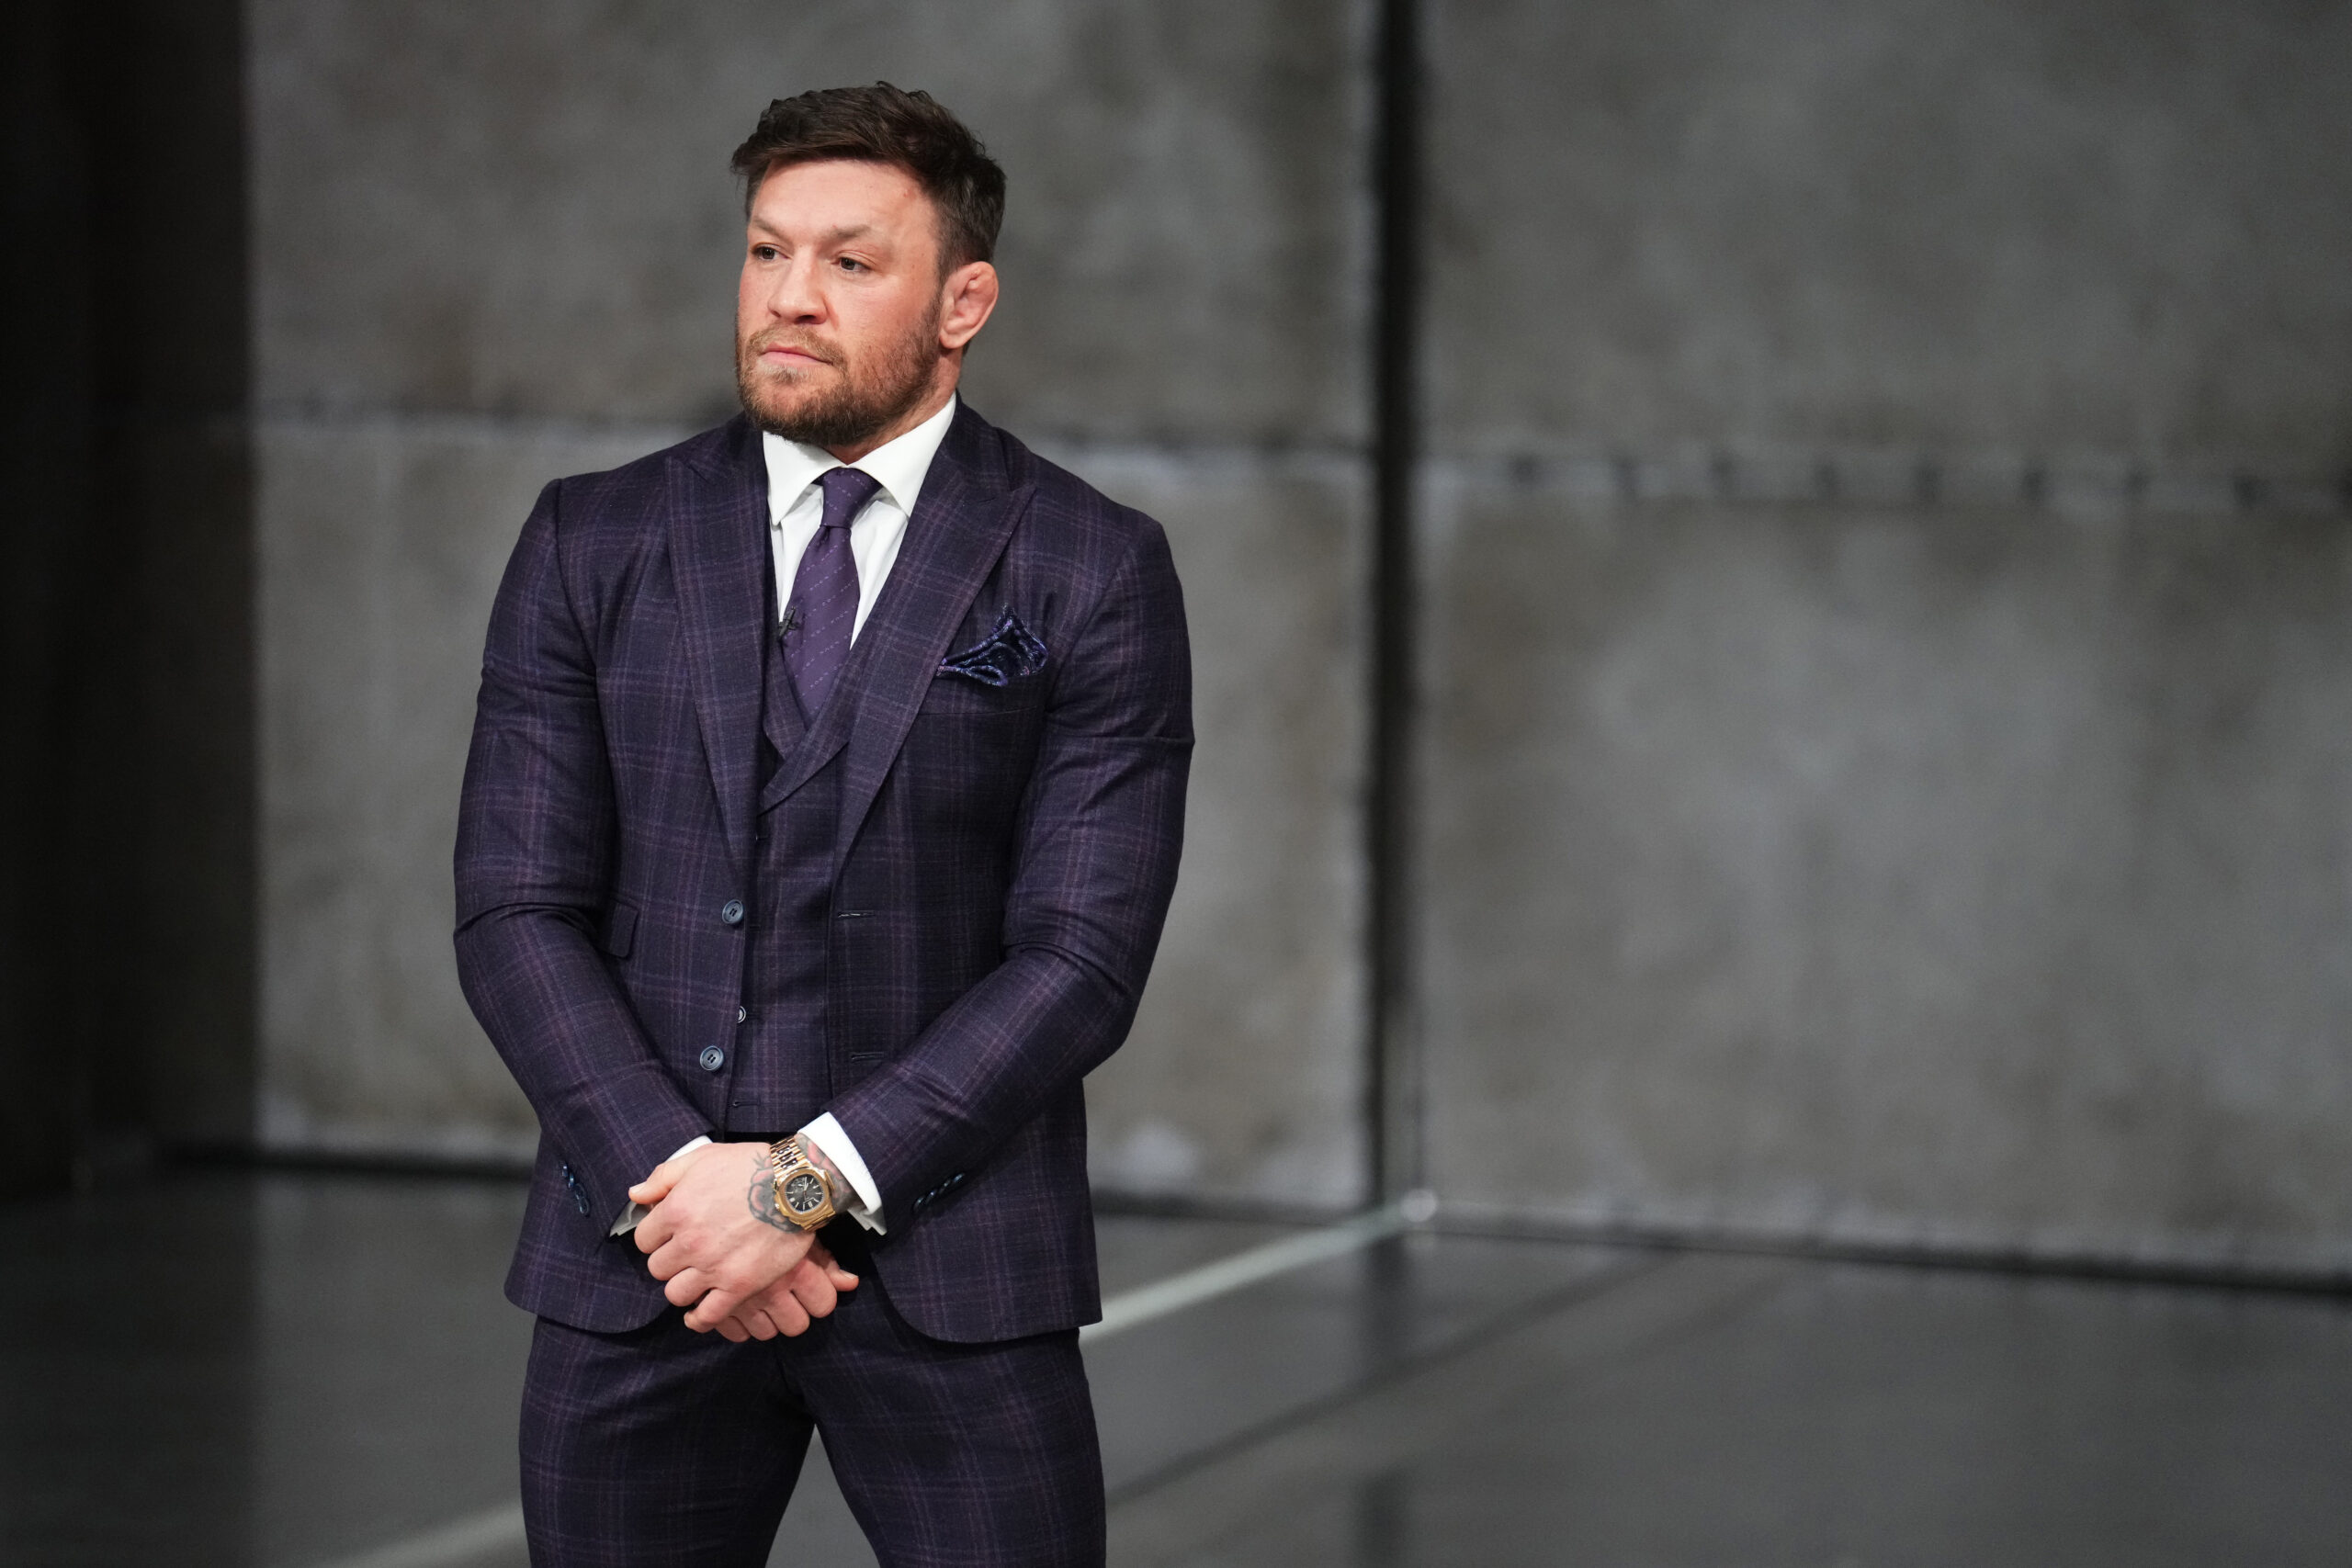 Conor McGregor accused of sexual assault at NBA Finals: Report